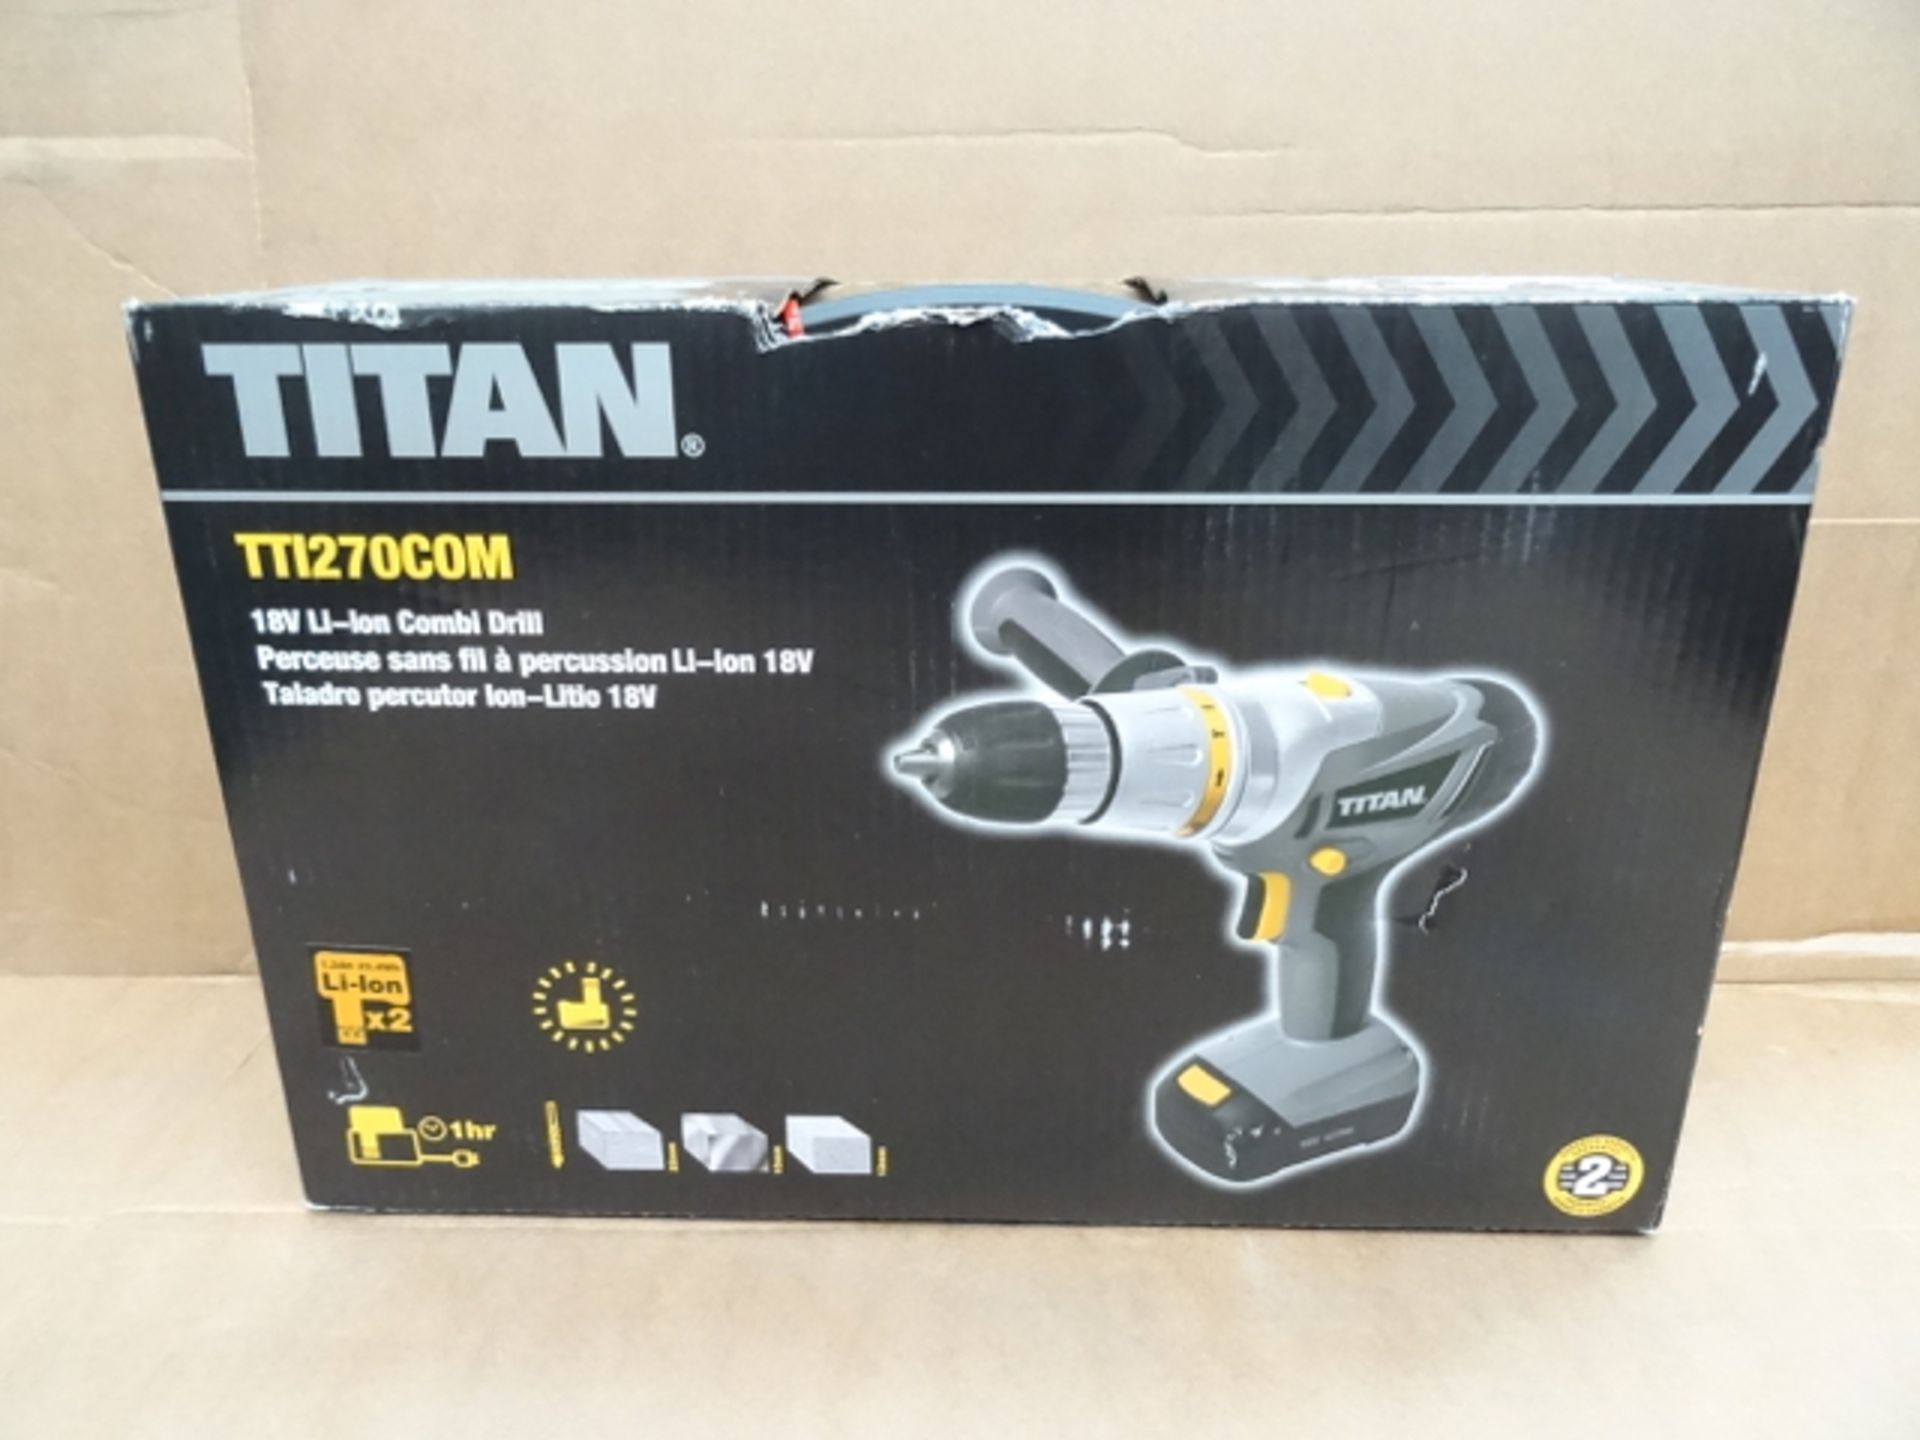 1 x Titan 18V Lithium-Ion Combi Drill. LED work light, 2 x Batteries, Charge indicator and side